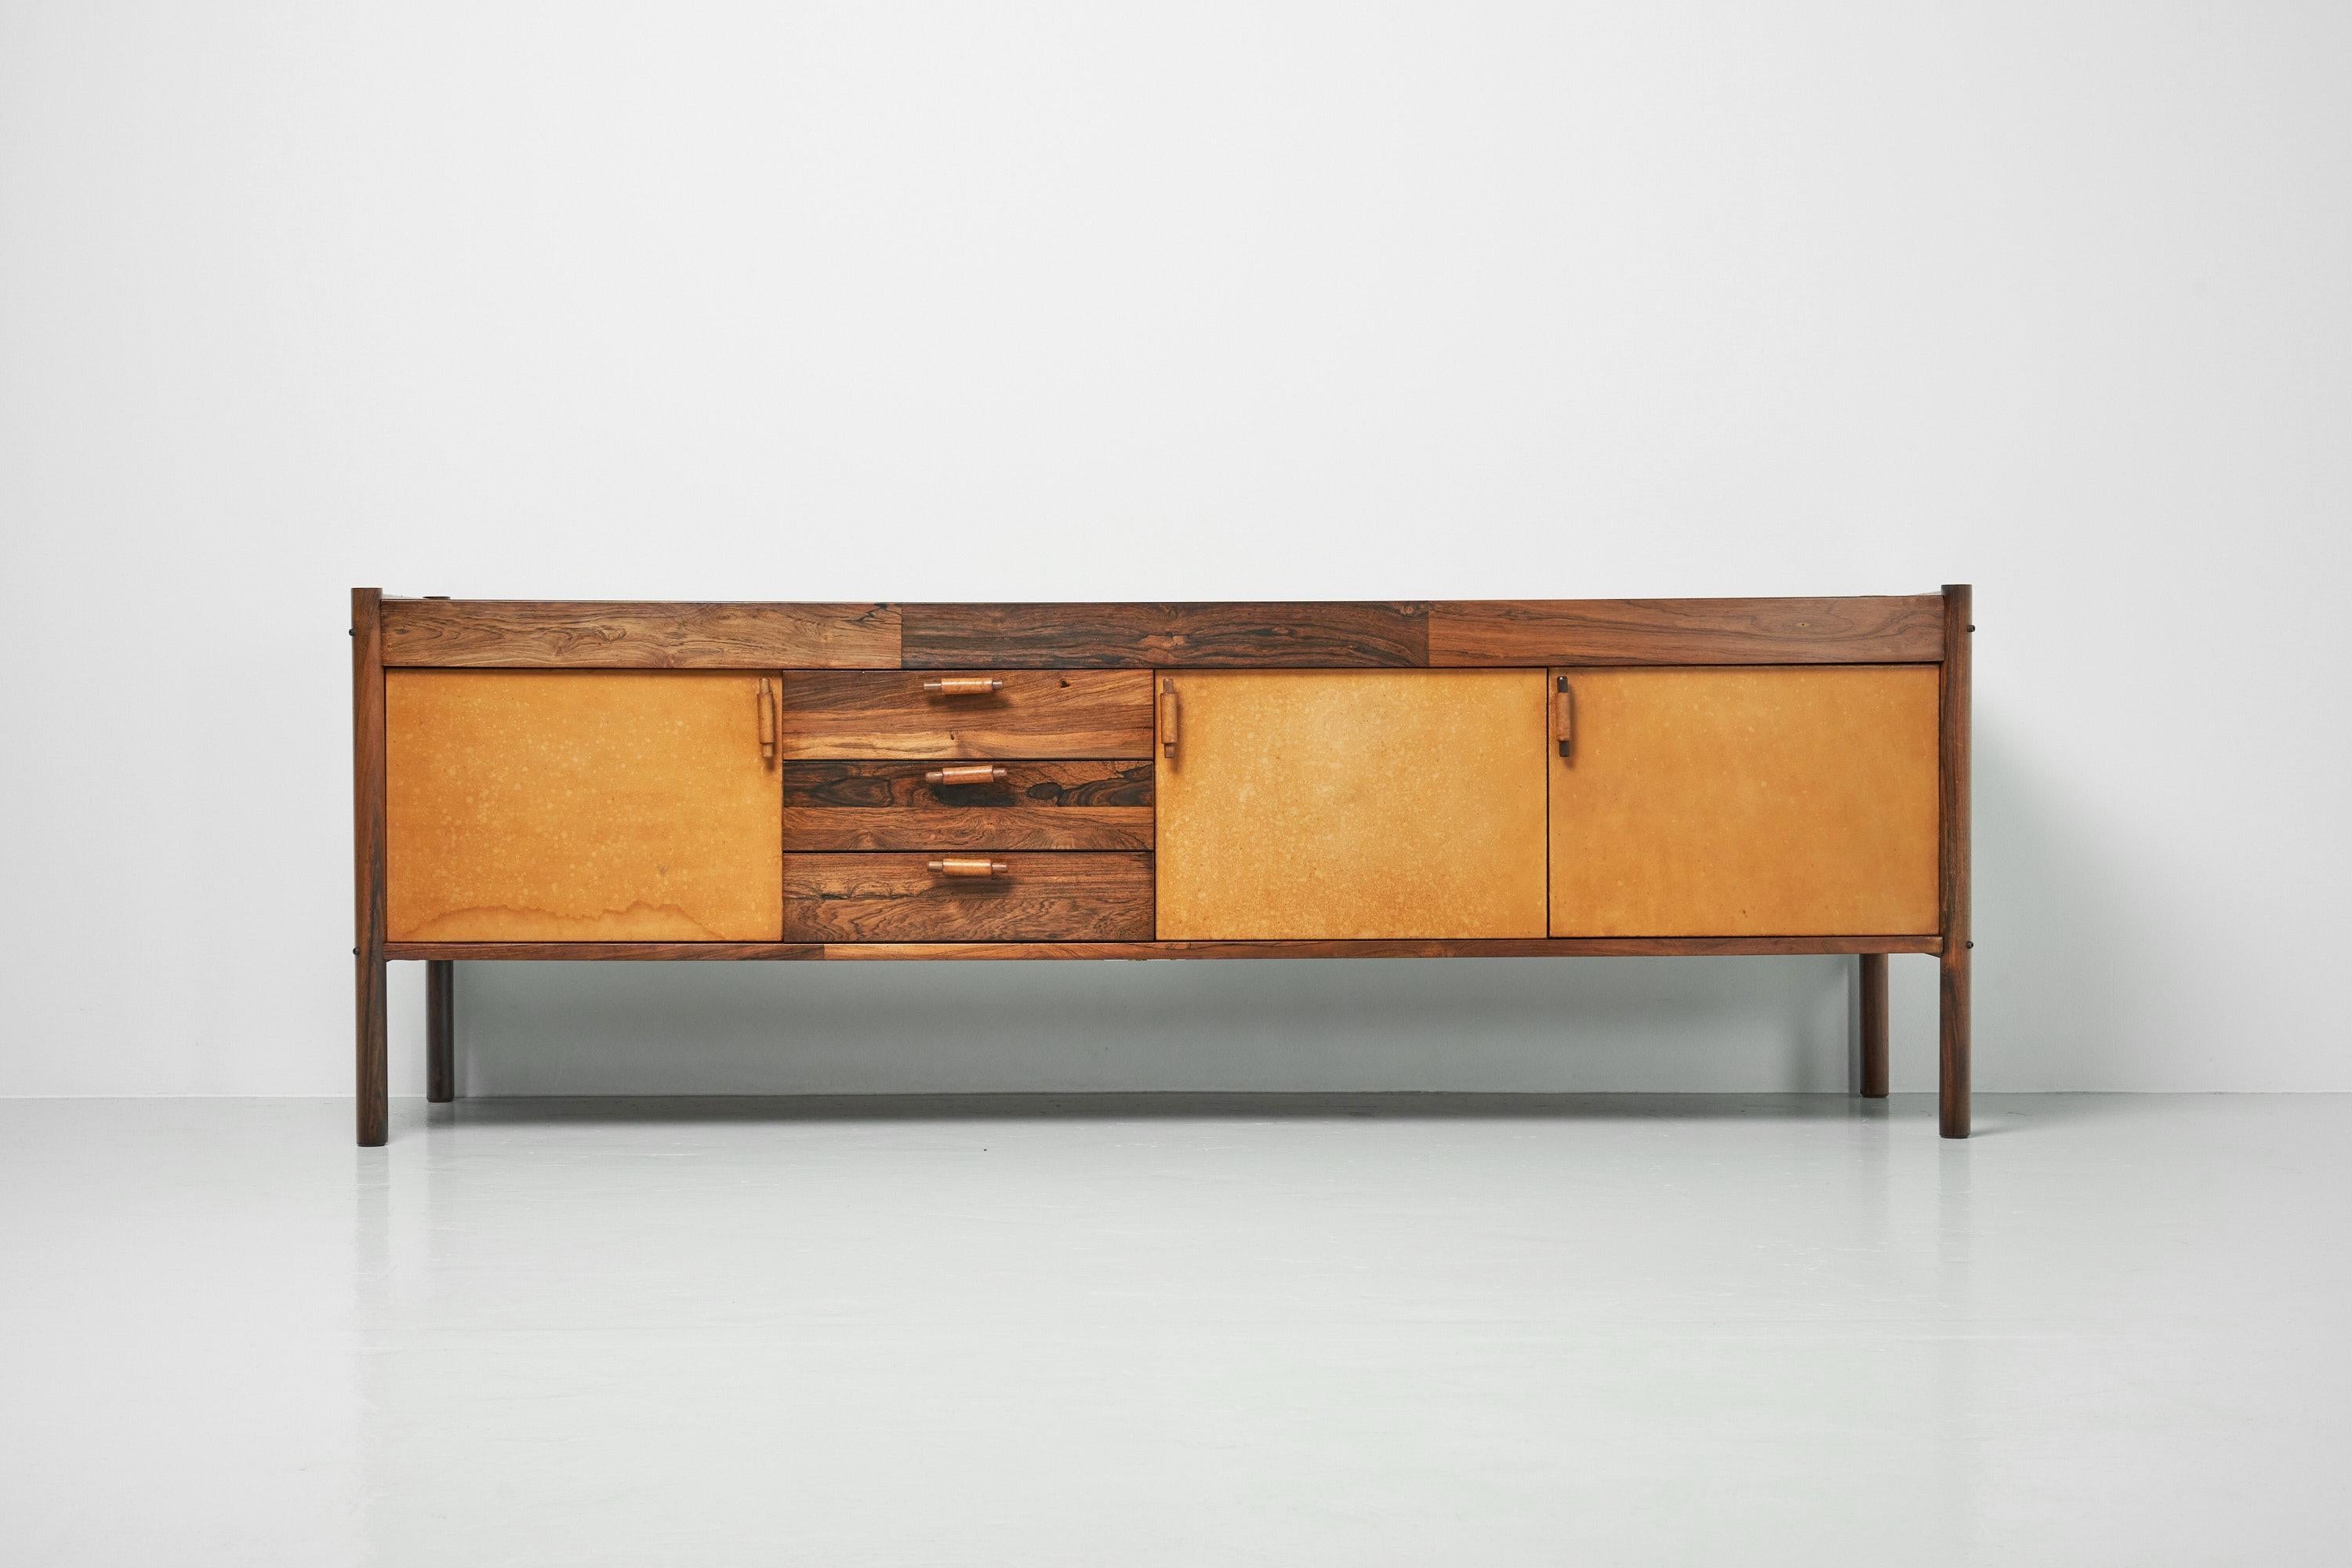 Stunning and unique made sideboard designed by Jorge Zalszupin and manufactured by his own comany L'Atelier, Brazil 1960. This is a unique sideboard designed especially for a customer’s holiday home in Biarritz, France 1960. This sideboard is